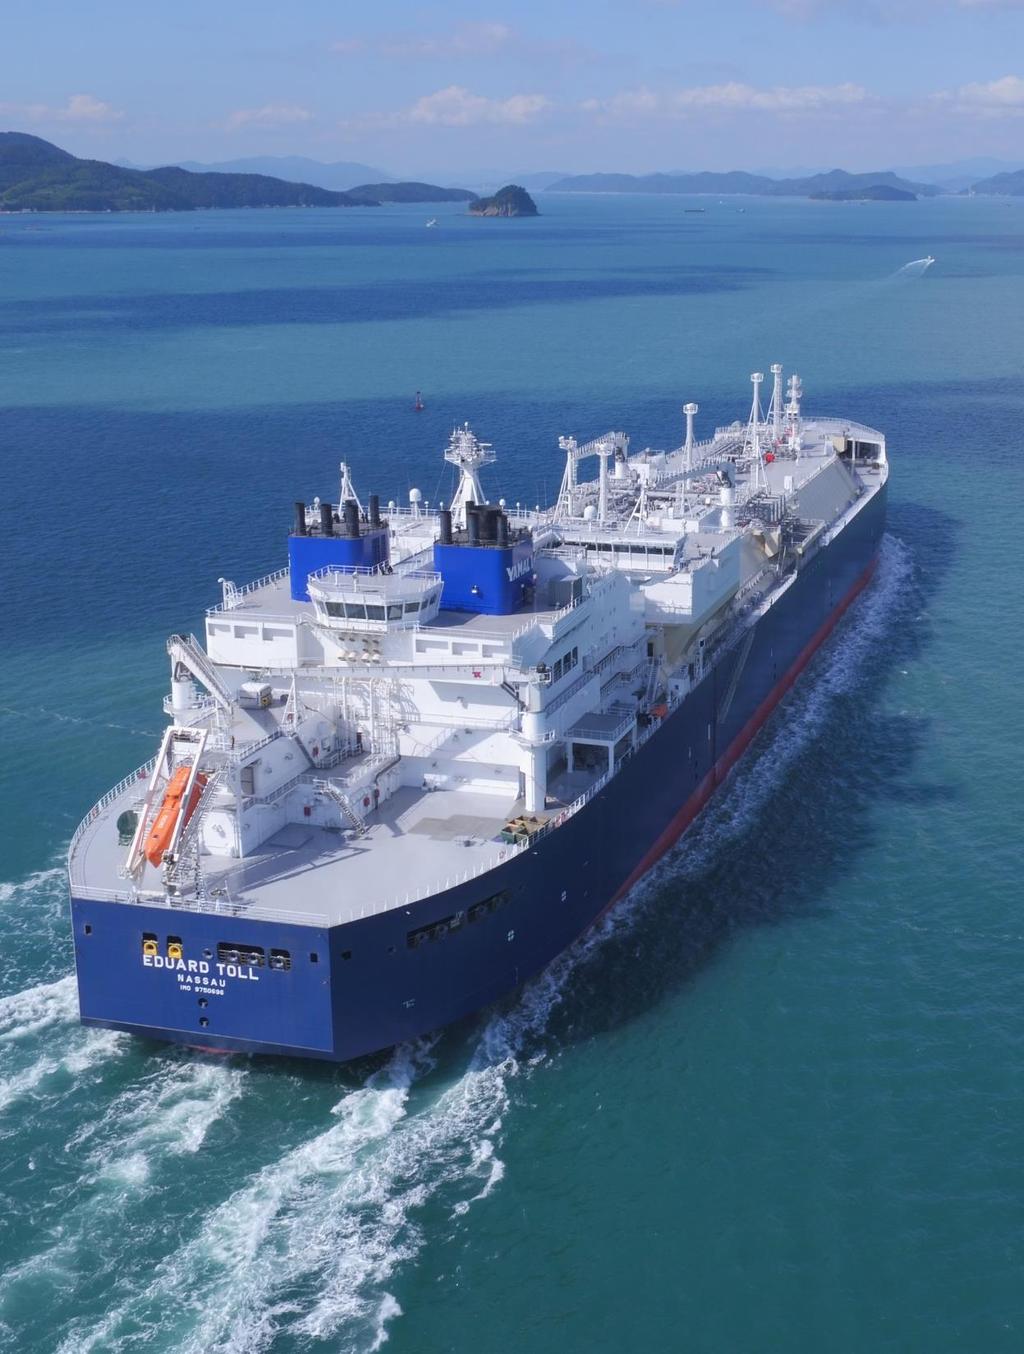 Yamal Project Prepares to Lift First Cargo Yamal Train 1 is now 97% complete with commissioning process commenced o Whole project (Trains 1-3) is 89% complete First LNG cargo planned for November